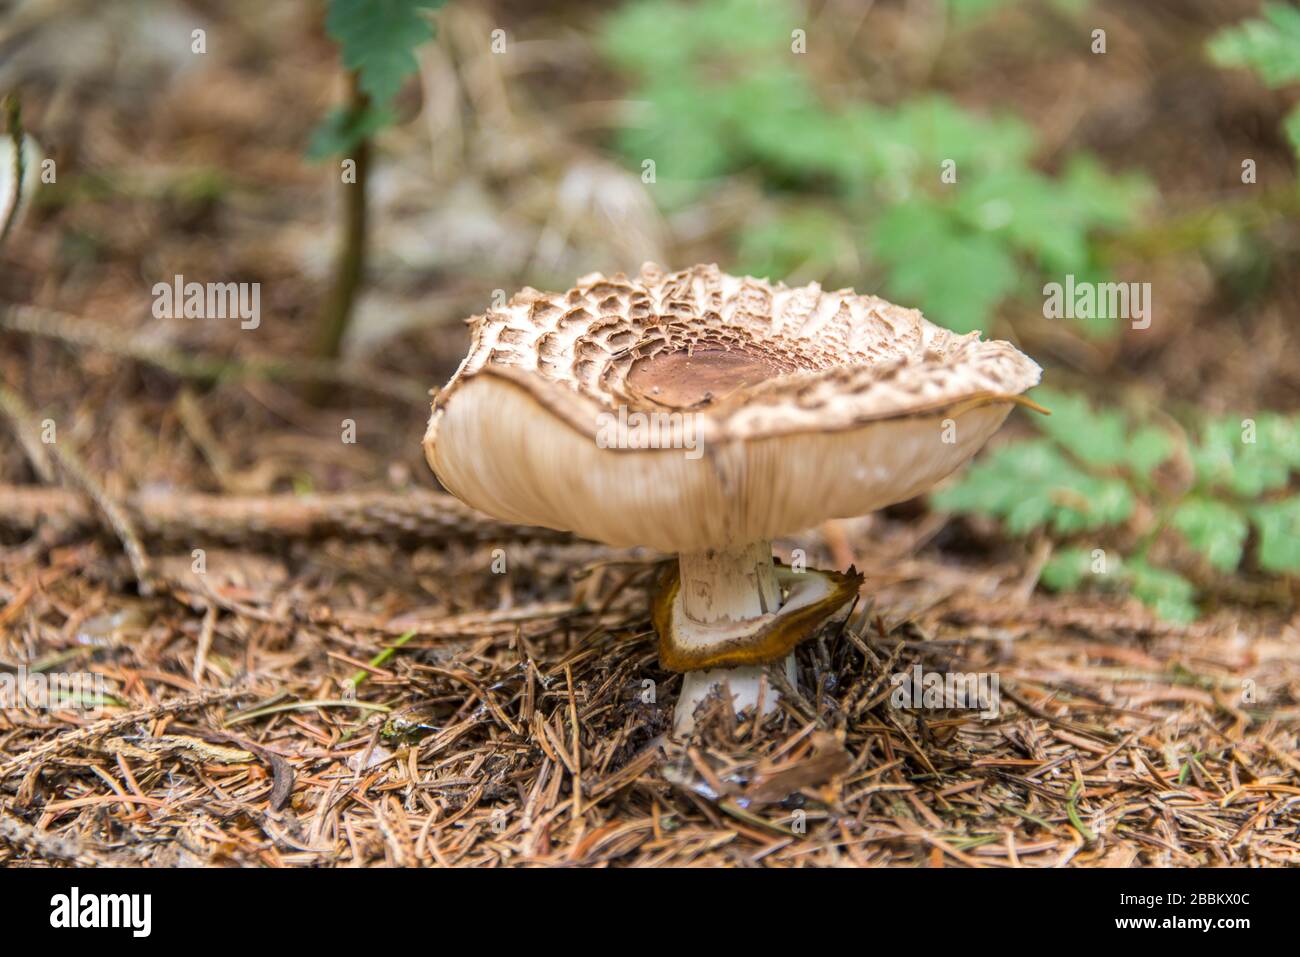 English country garden, wild brown mushroom growing in a woodland. England, UK Stock Photo